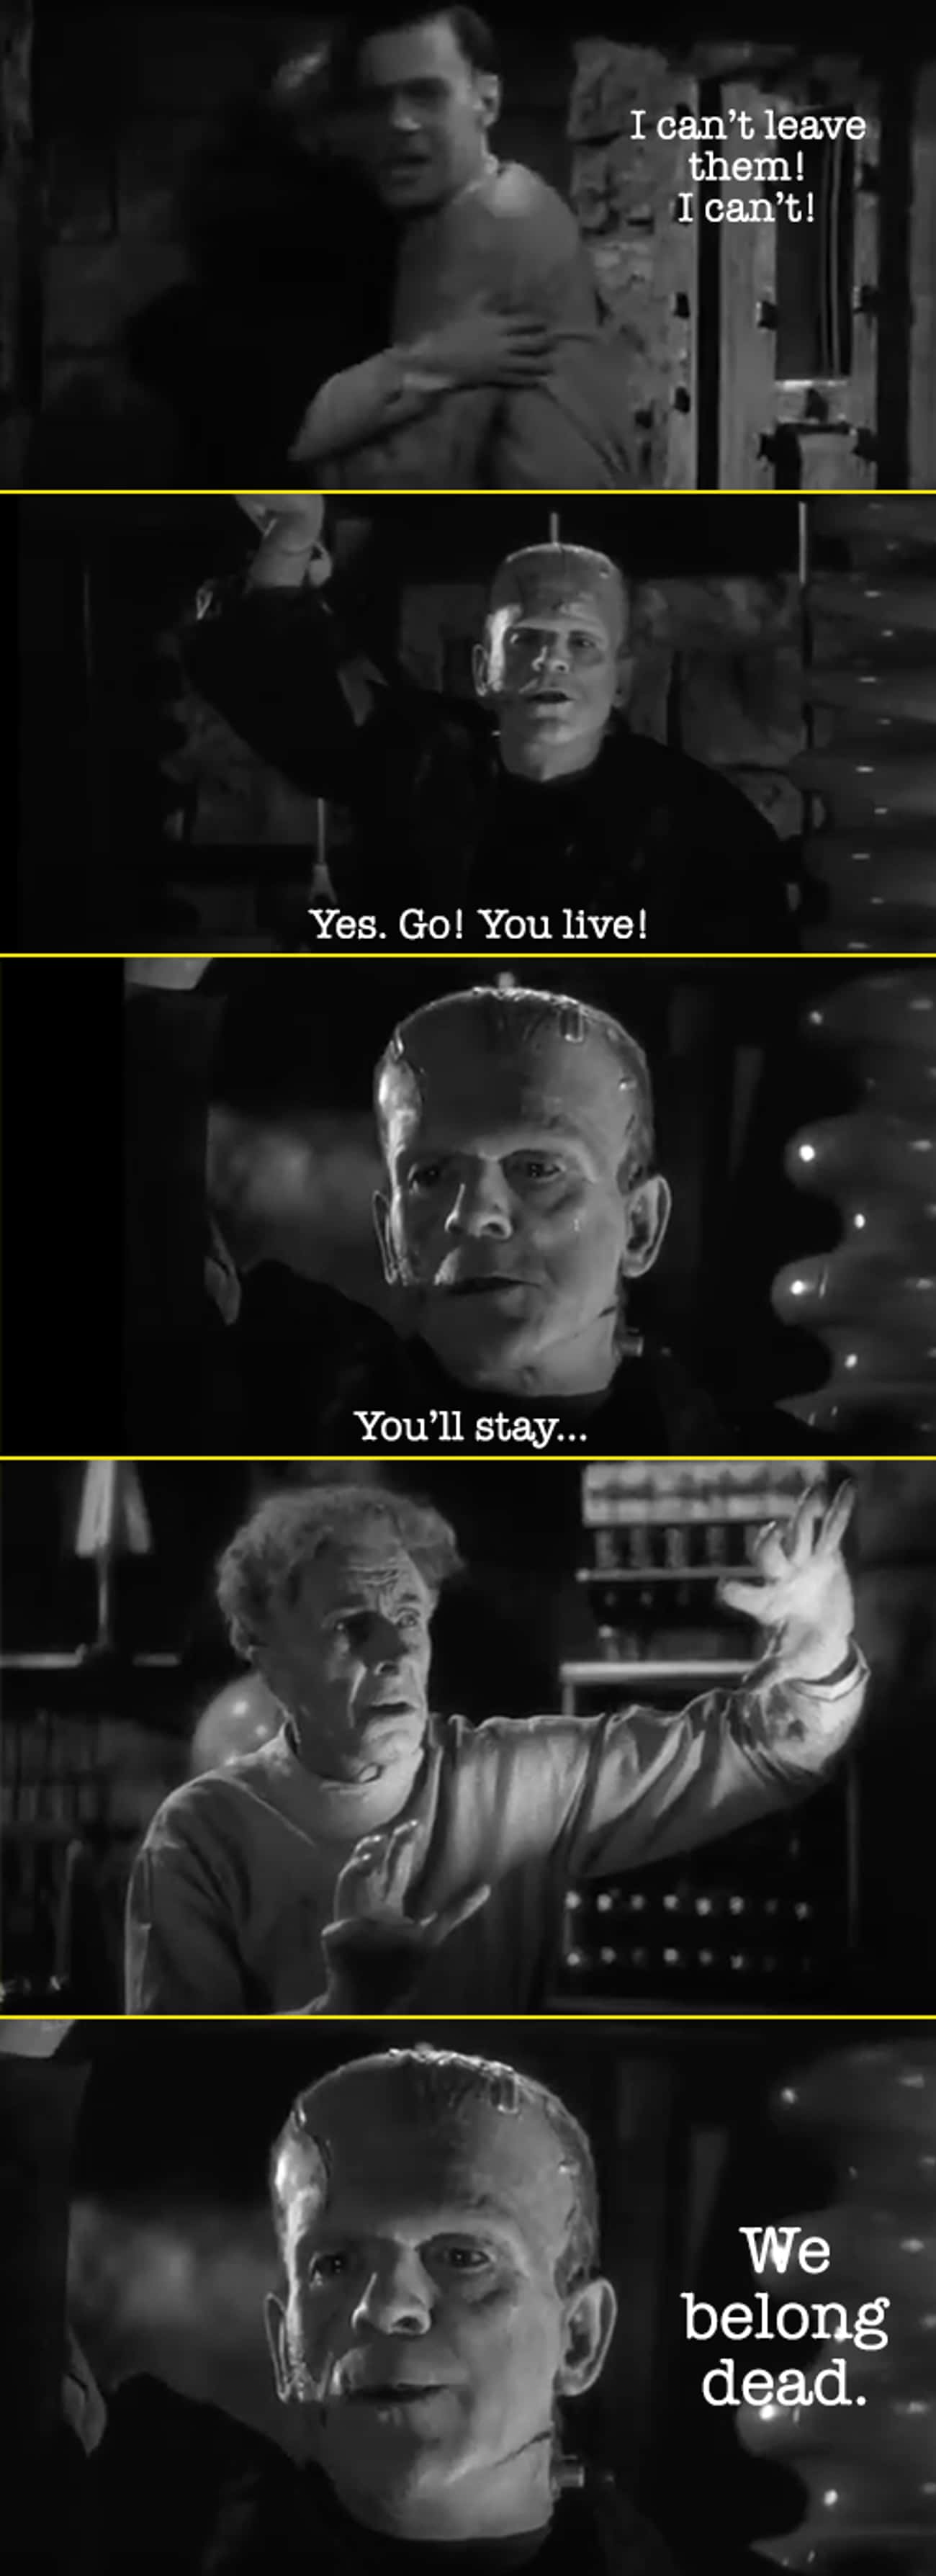 The Monster Makes A Decision In 'Bride of Frankenstein'